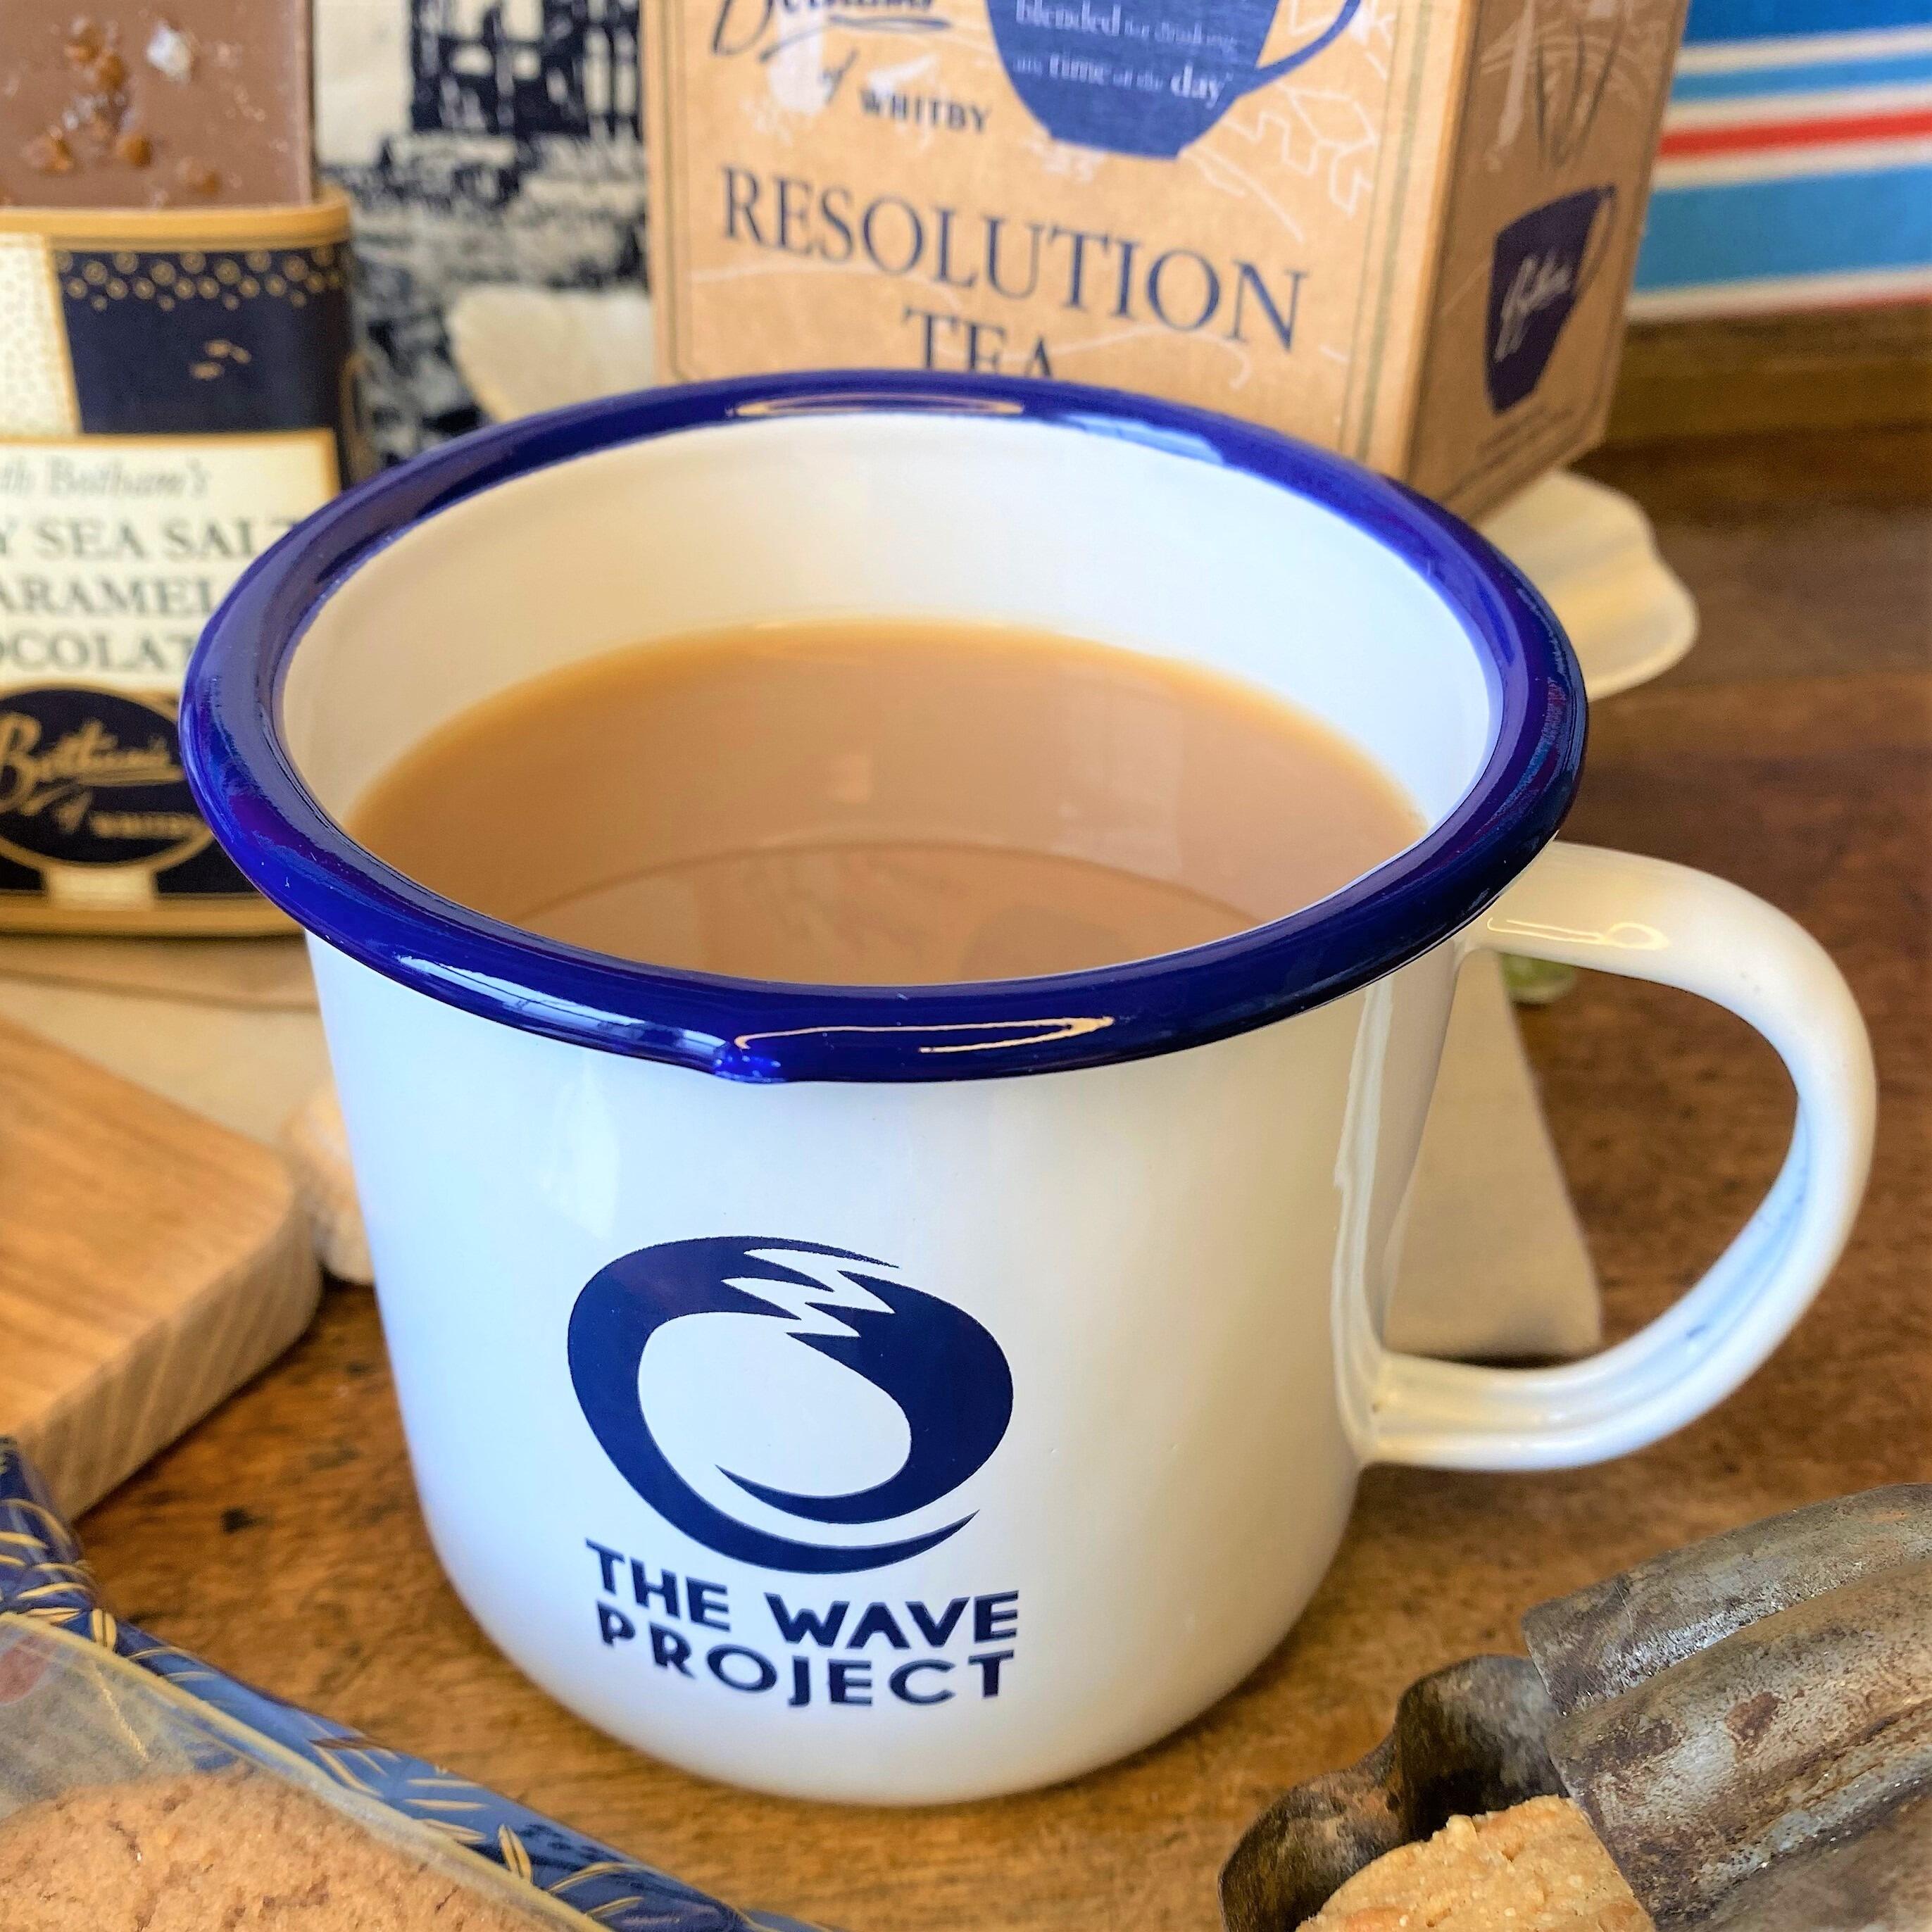 Close-up image of The WAVE Project mug containing strong tea and The WAVE Project logo printed on the white enamel mug.